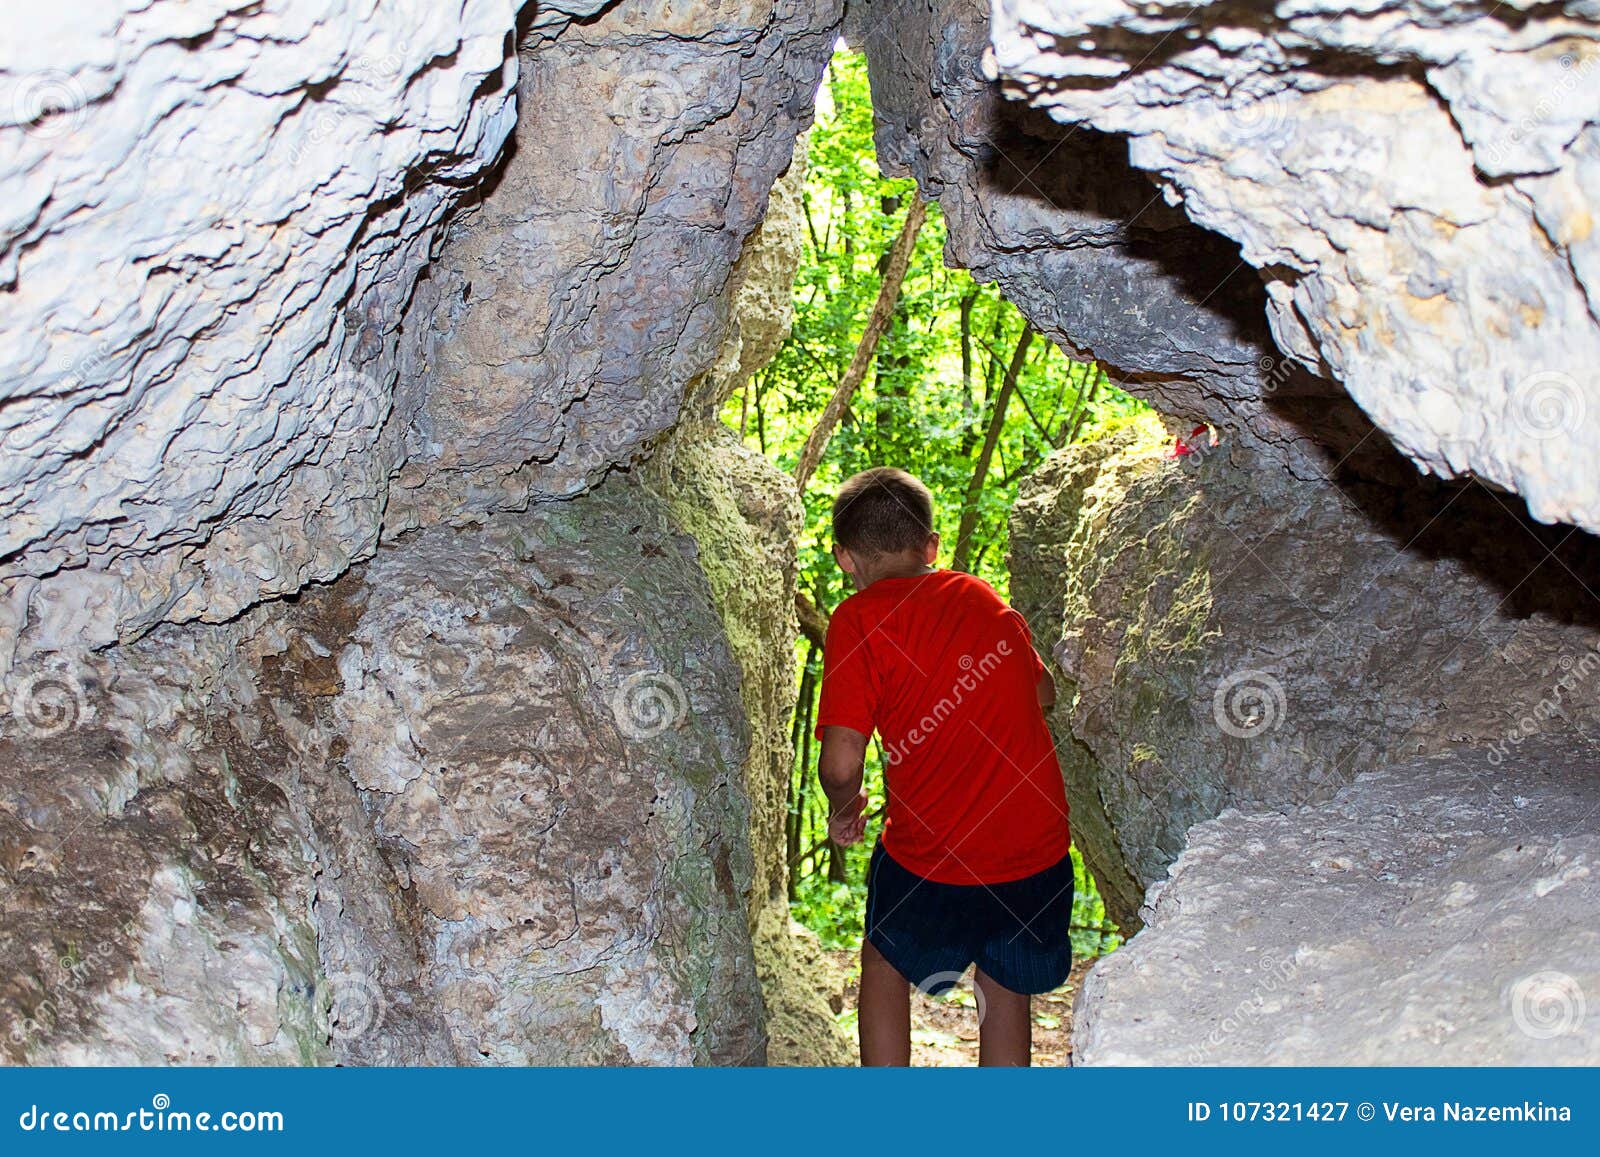 the boy exits the cave in the rock, the rear view.